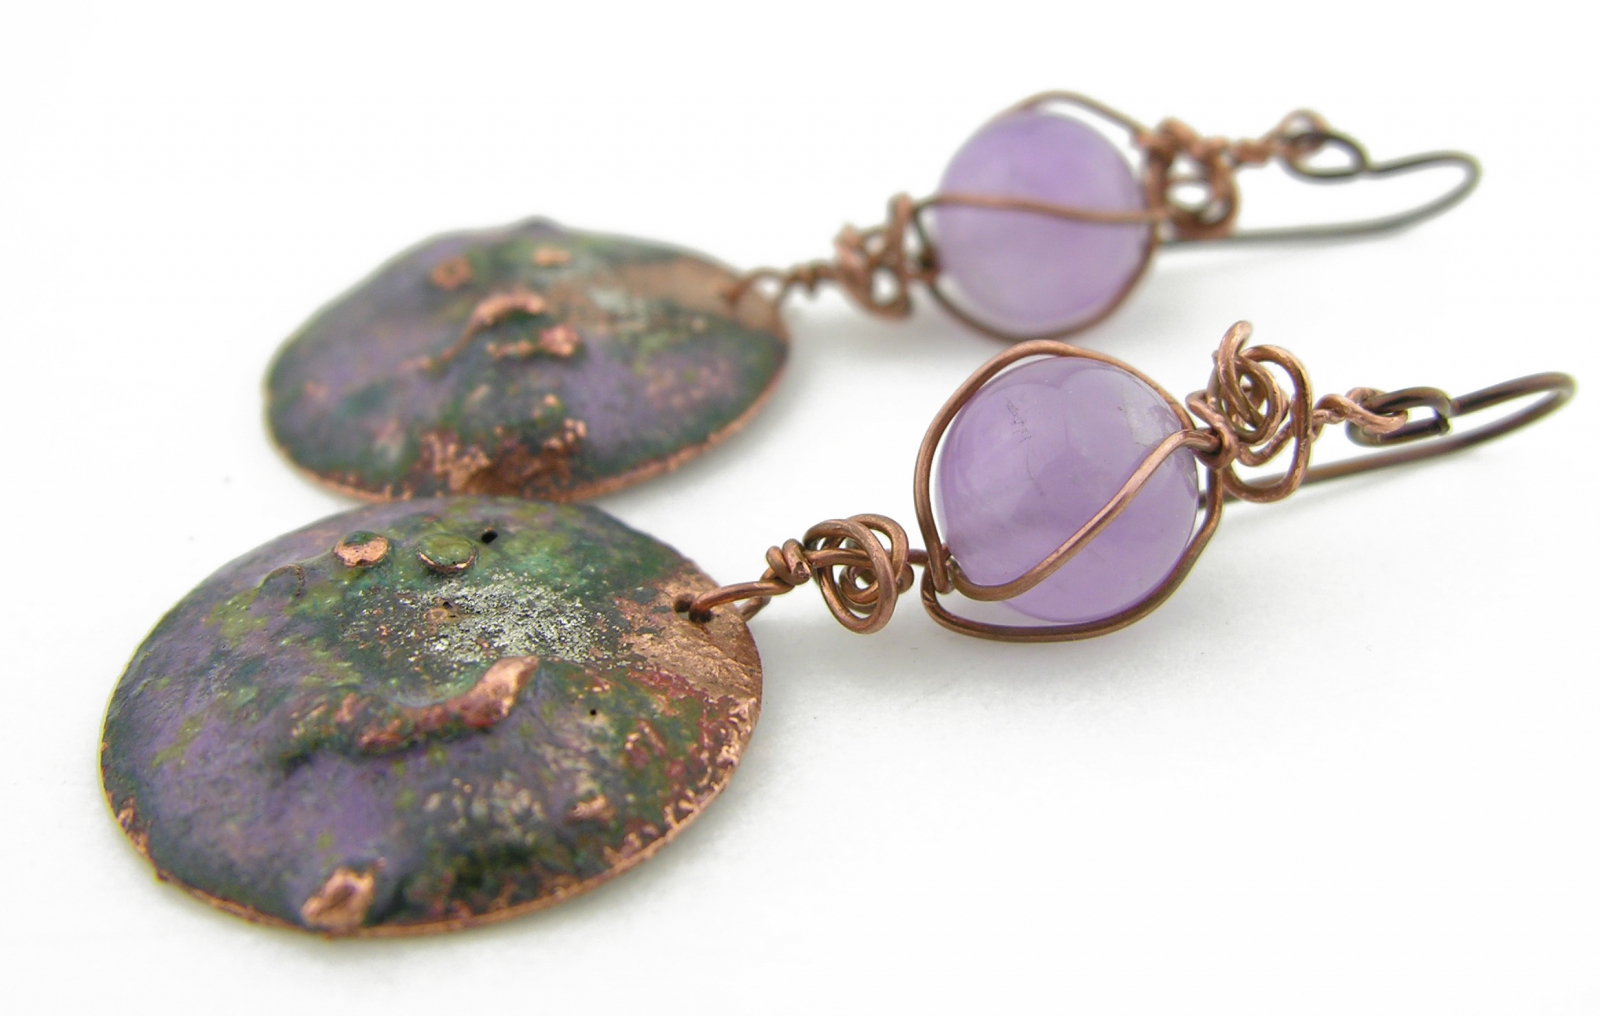 chaos earrings - reticulated copper with copper enamel and silver, amethyst, copper wire and niobium ear wires